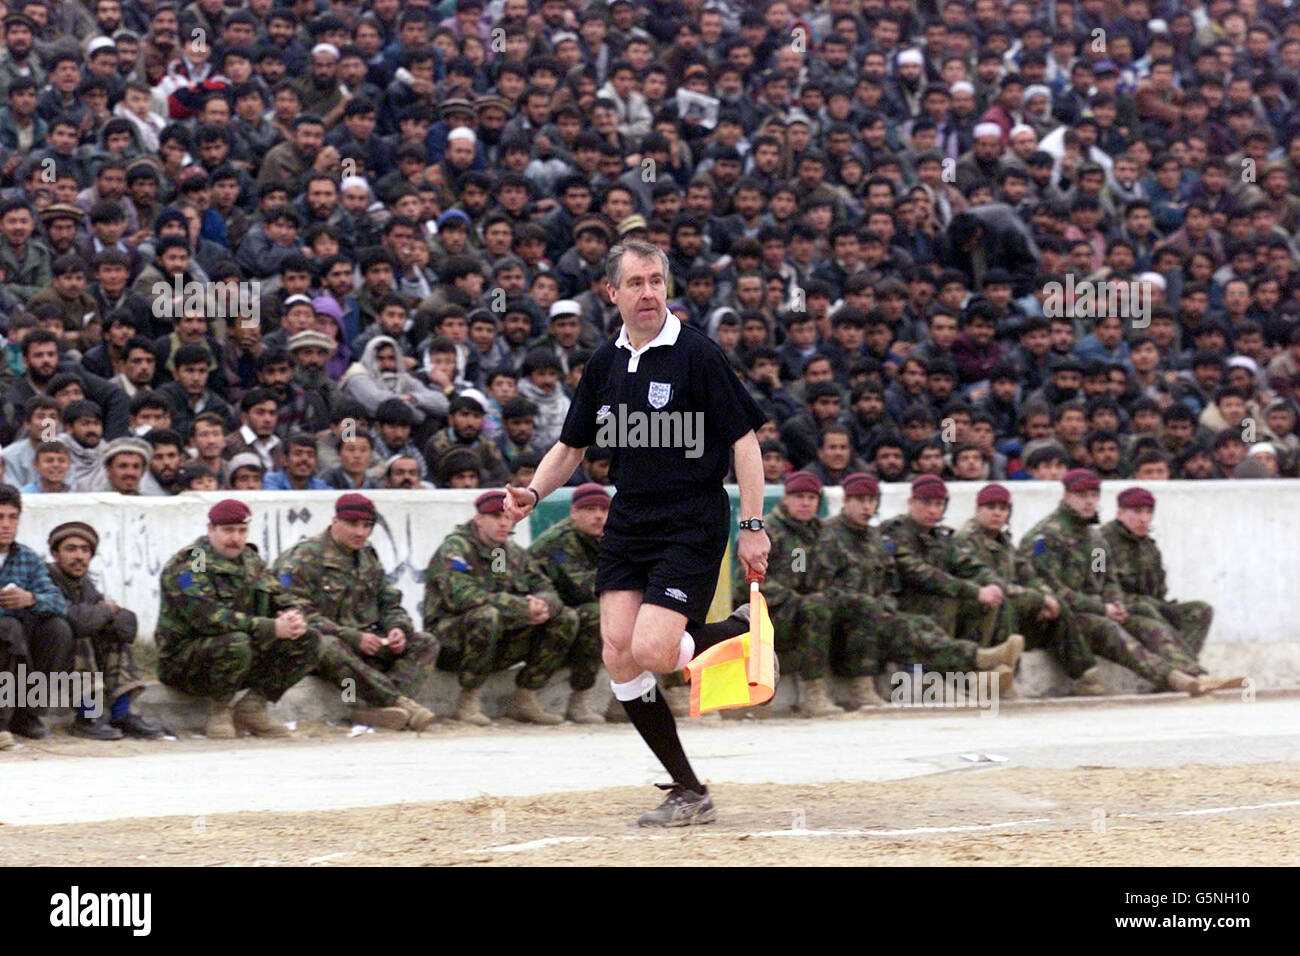 Assistant referee Andy Martin in action during a soccer match at the Olympic Stadium in Kabul, Afghanistan between ISAF (the International Security Assistance Force) and Kabul FC (in blue). The game was organised by the Football Association, the MoD and Barclaycard the new sponsors the Premiership. Lawrie McMenemy and former Tottenham Hotspurs player Gary Mabbutt have spent two days in the war torn country coaching both teams. The ISAF side includes soldiers from Great Britain, Italy, Germany and Holland and played in the Olympic Stadium more infamous for the executions held there by the Stock Photo